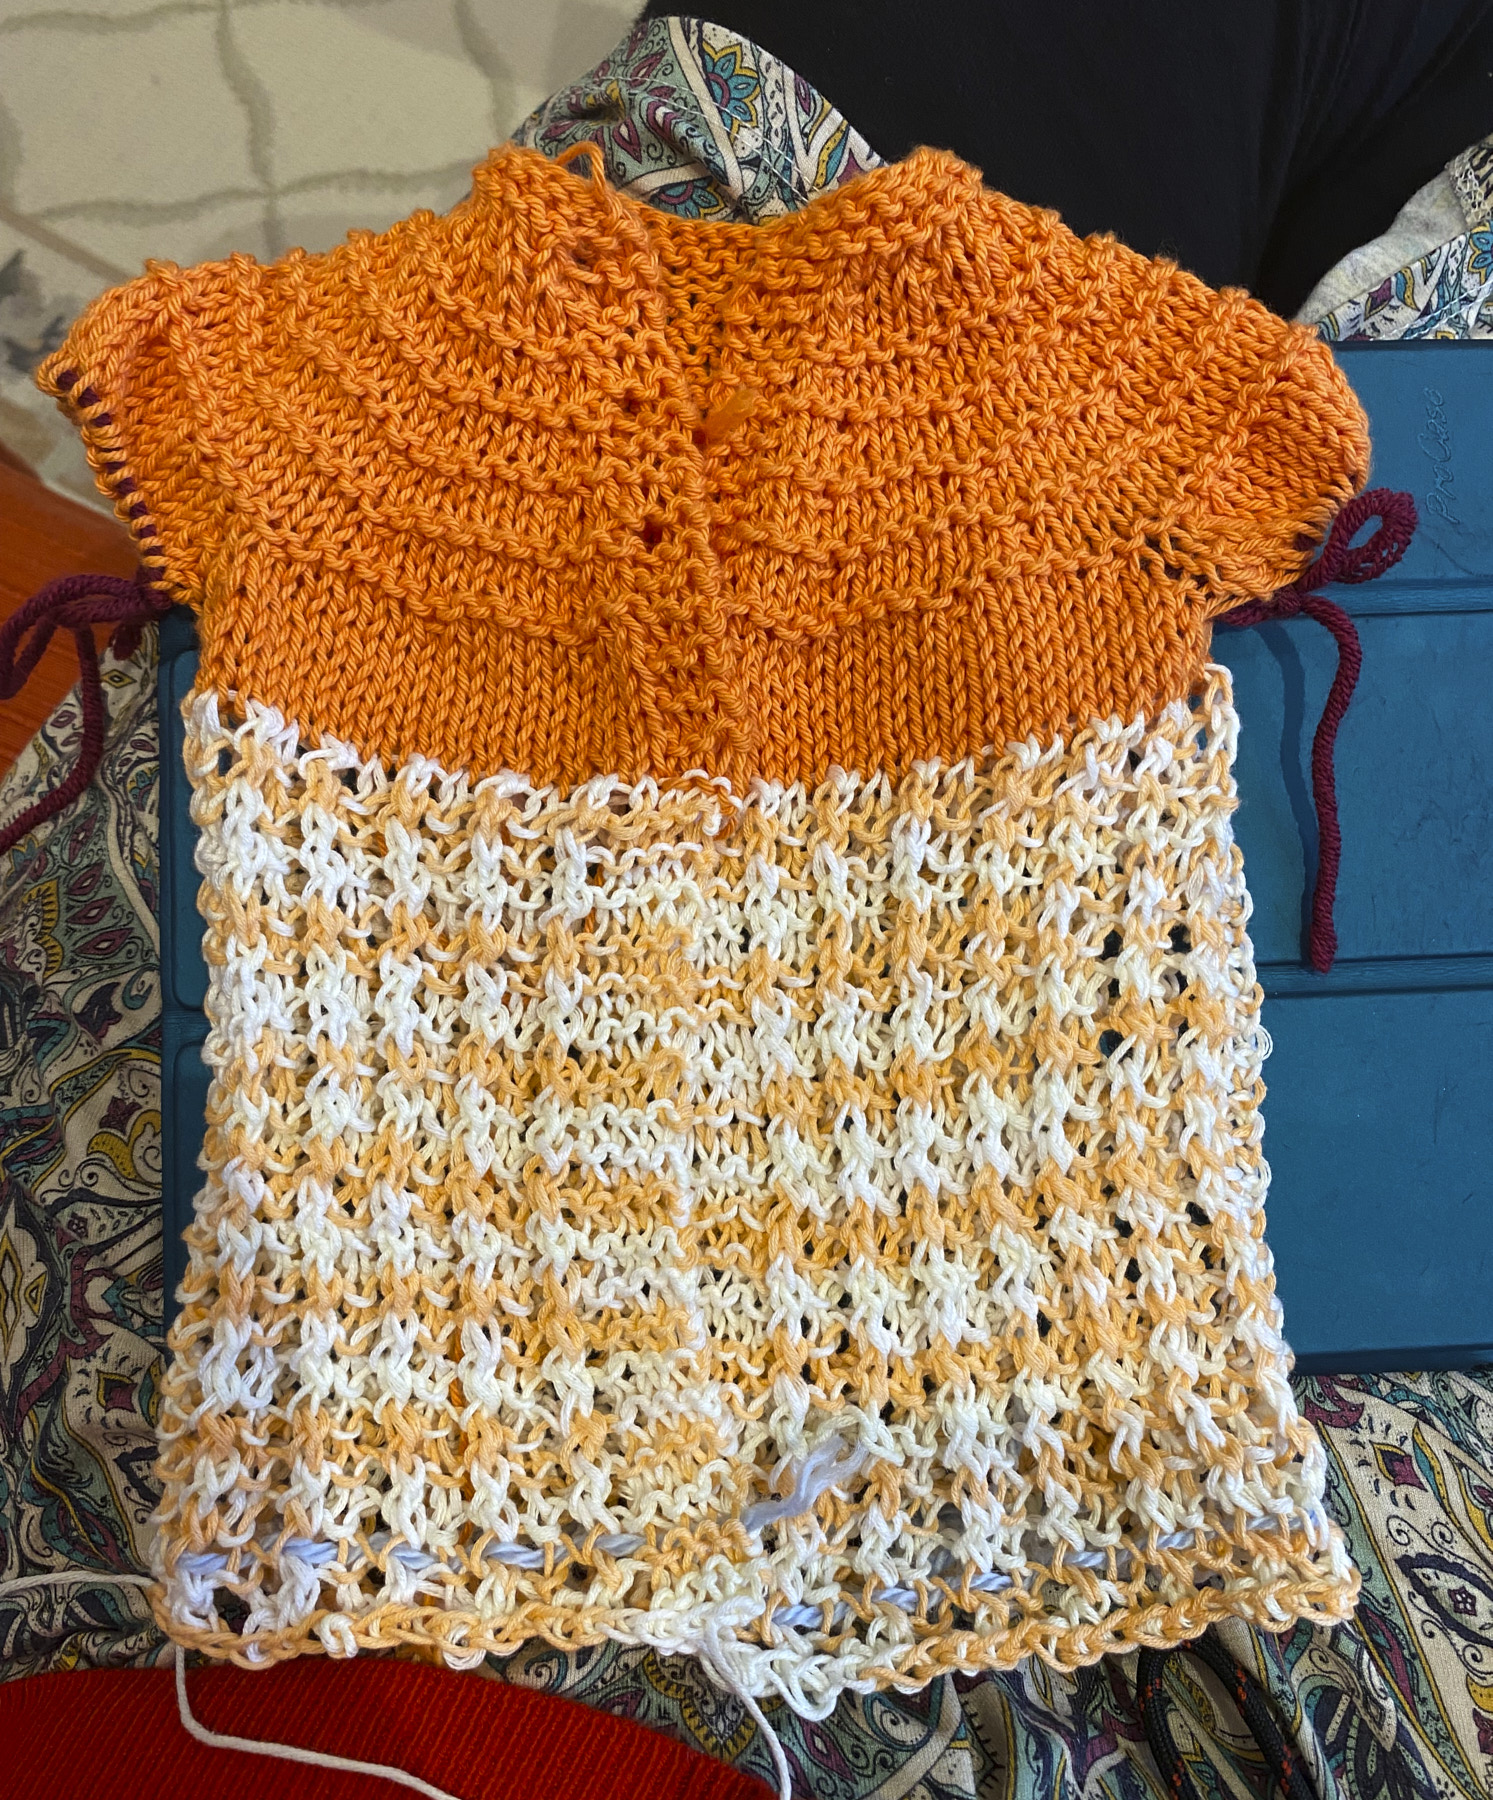 Front lacy baby sweater done in orange